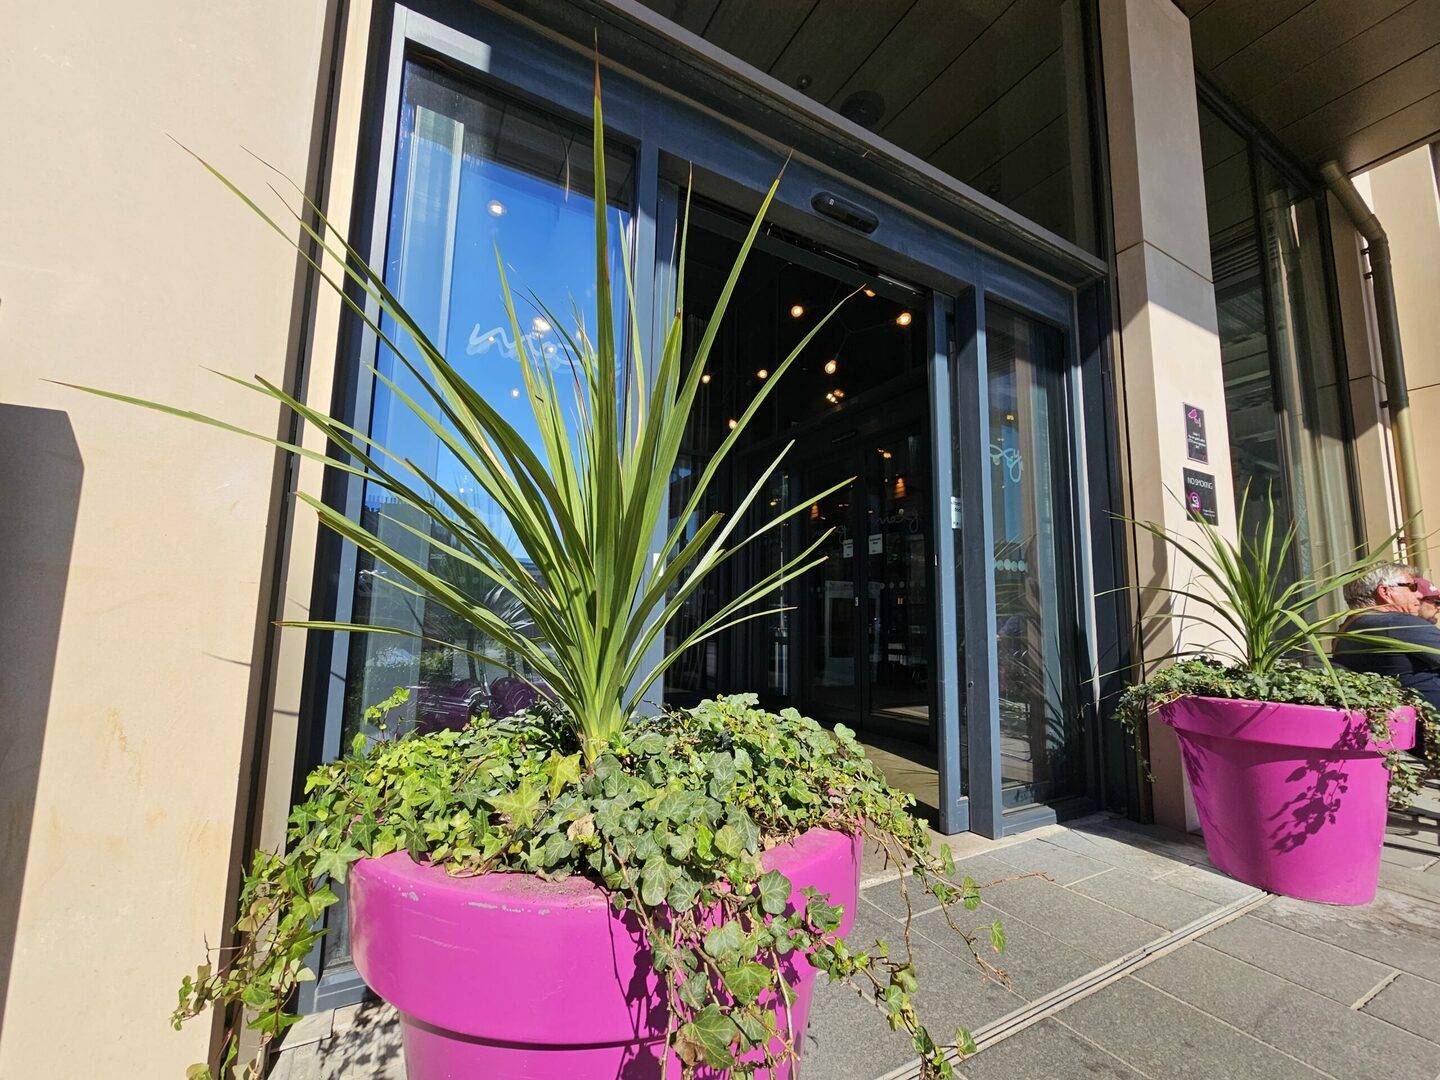 Entrance of Moxy hotel with Plants